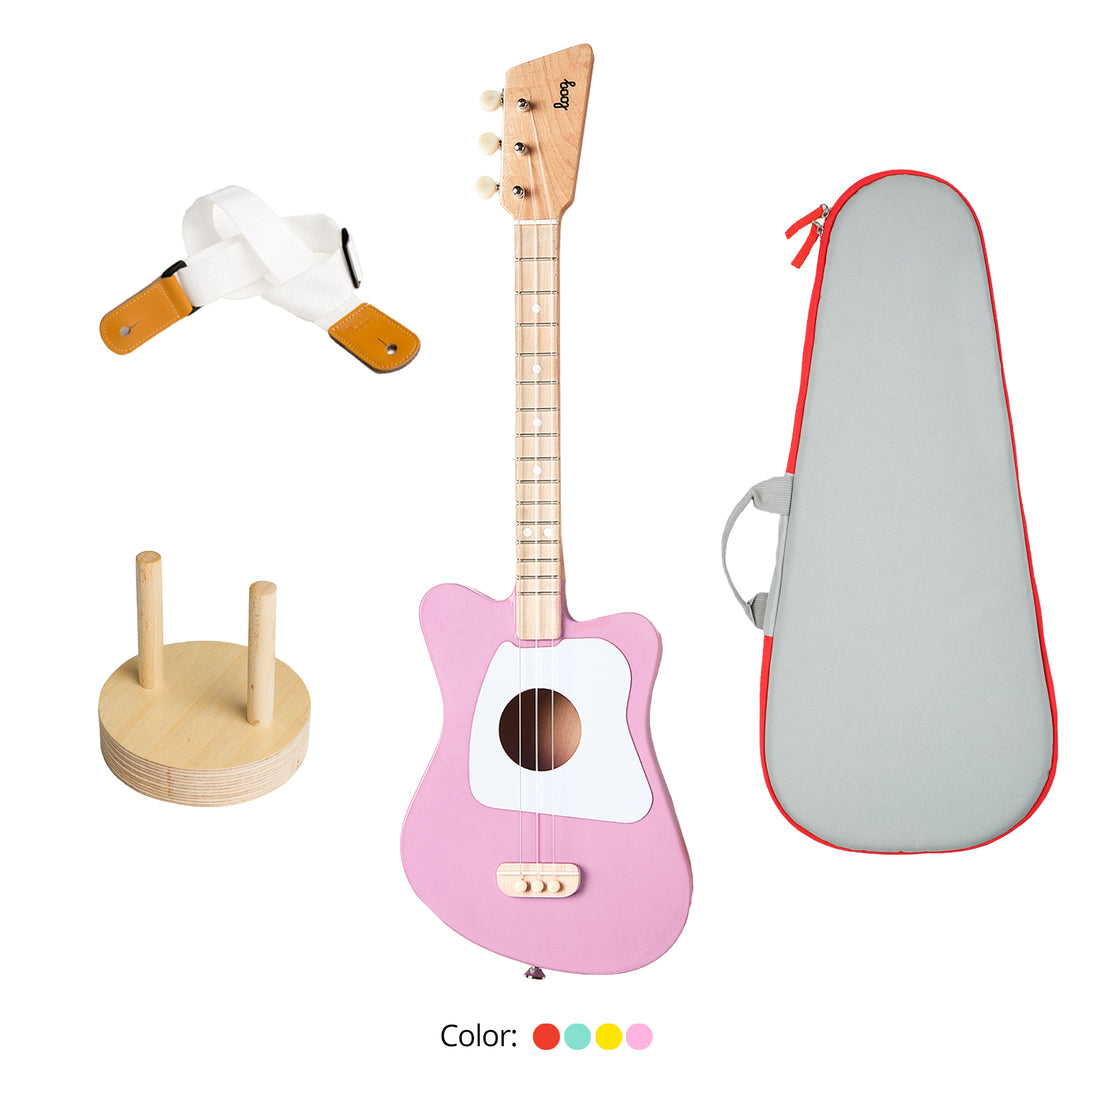 Loog Mini Guitar Bundle with Bag, Strap and Wall Hanger (Includes FREE App, Flashcards & Chord Diagram)